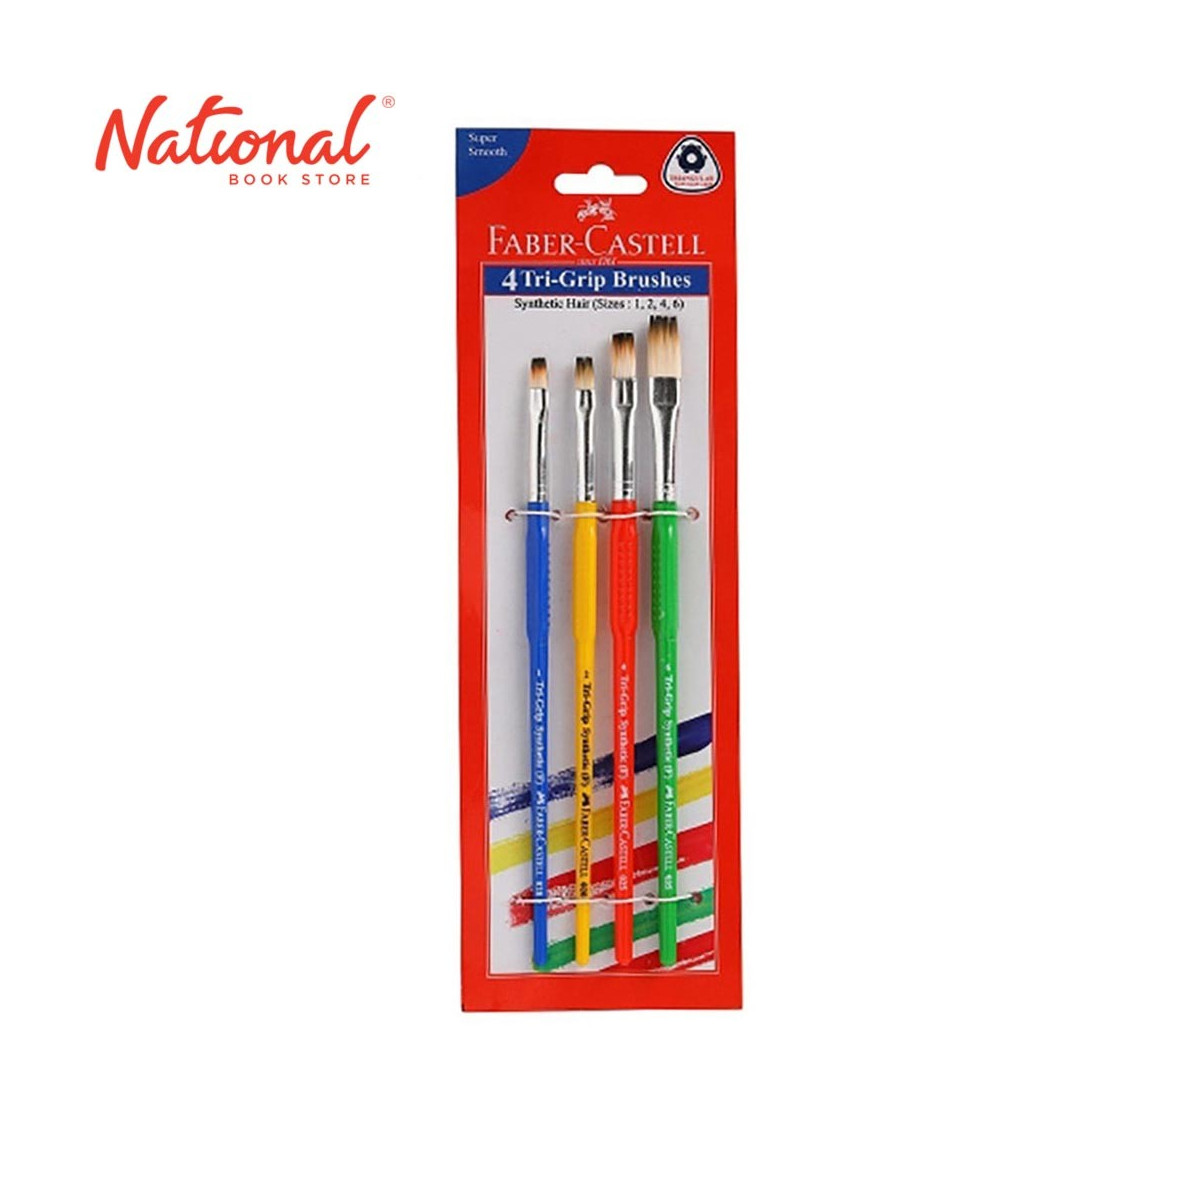 FABER CASTELL TRI-GRIP BRUSH SET OF 4 116402 FLAT SYNTHETIC